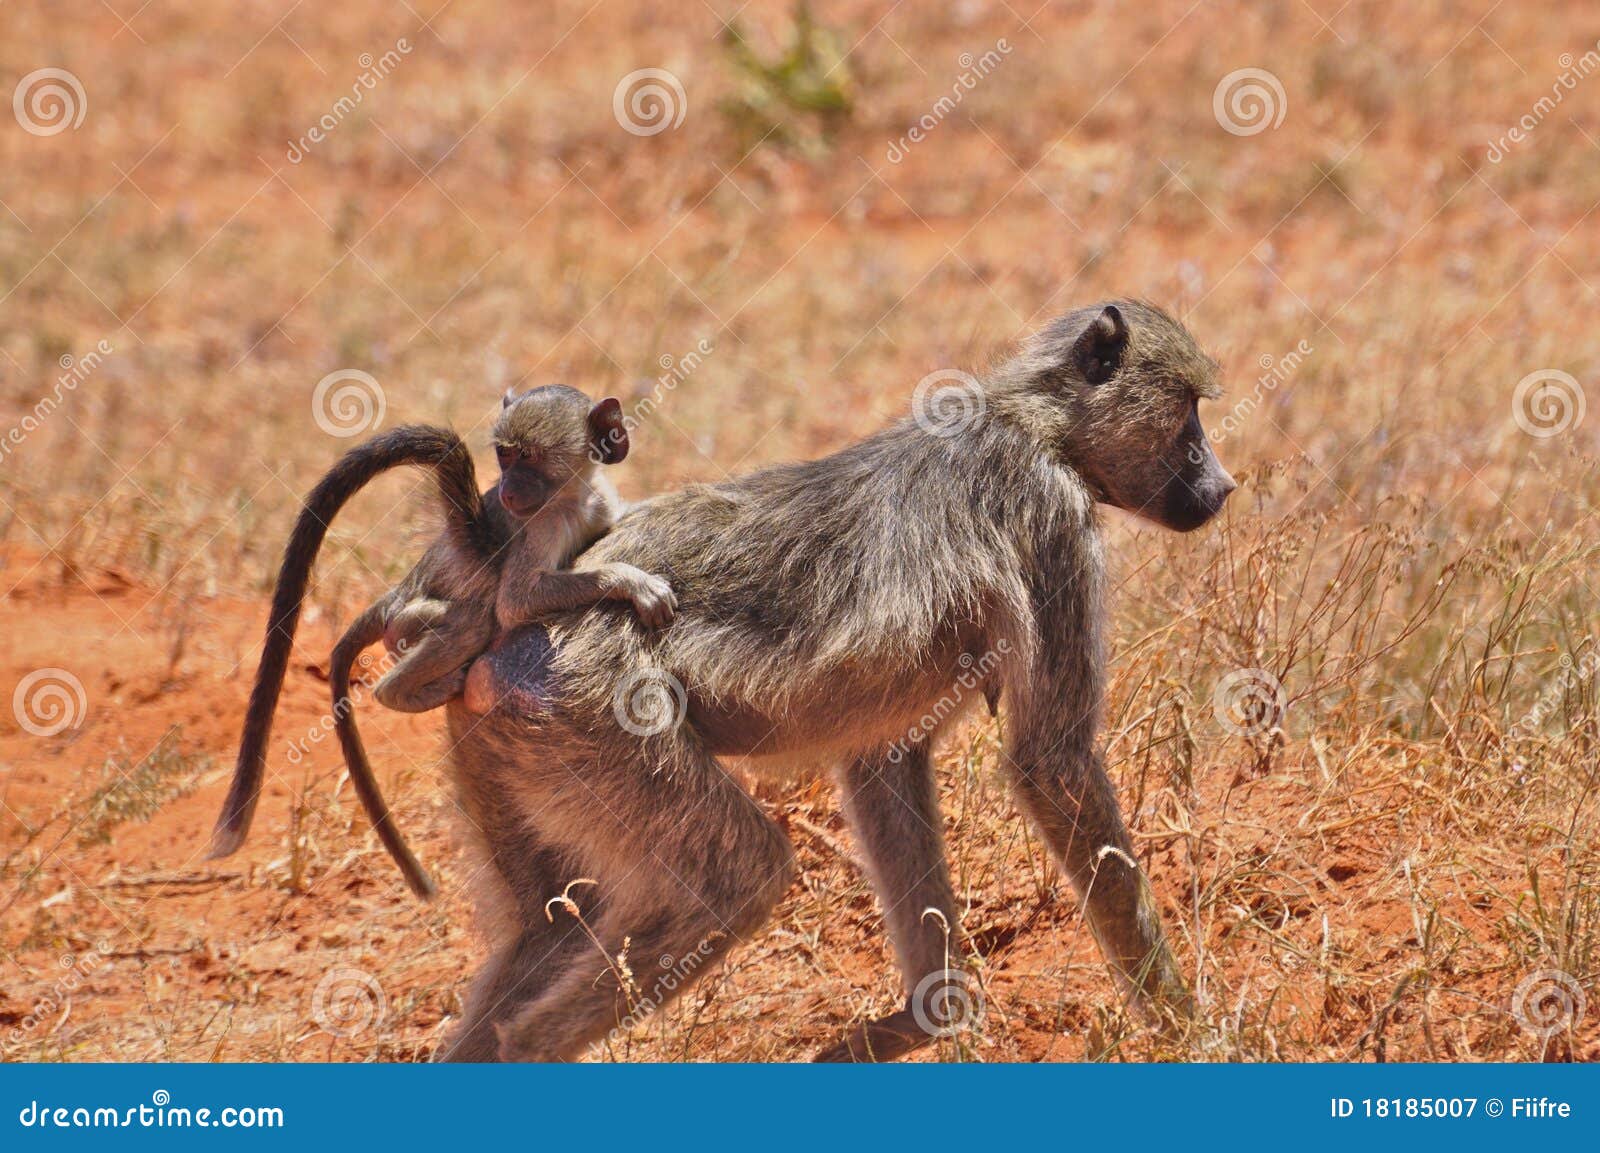 baboon monkey with baby africa